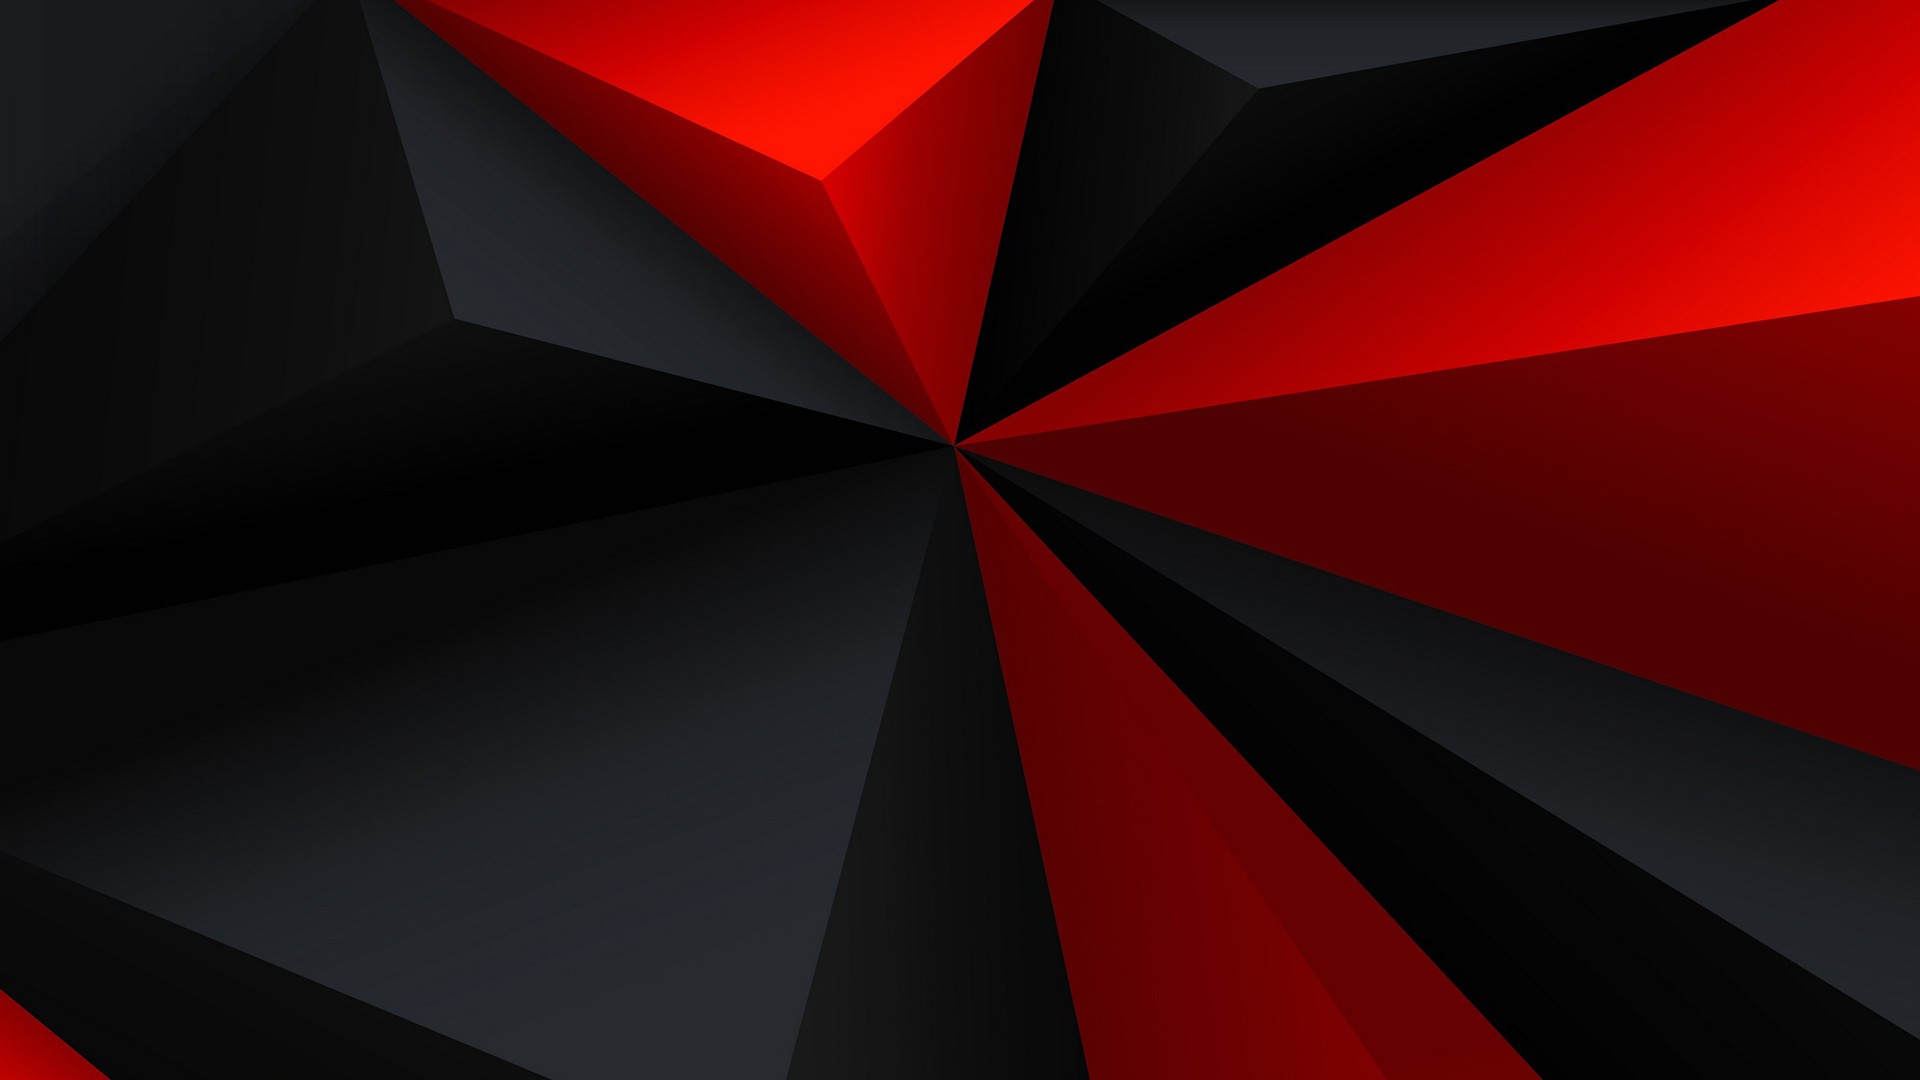 digital Art, Minimalism, Low Poly, Geometry, Triangle, Red, Black, Gray, Abstract Wallpaper